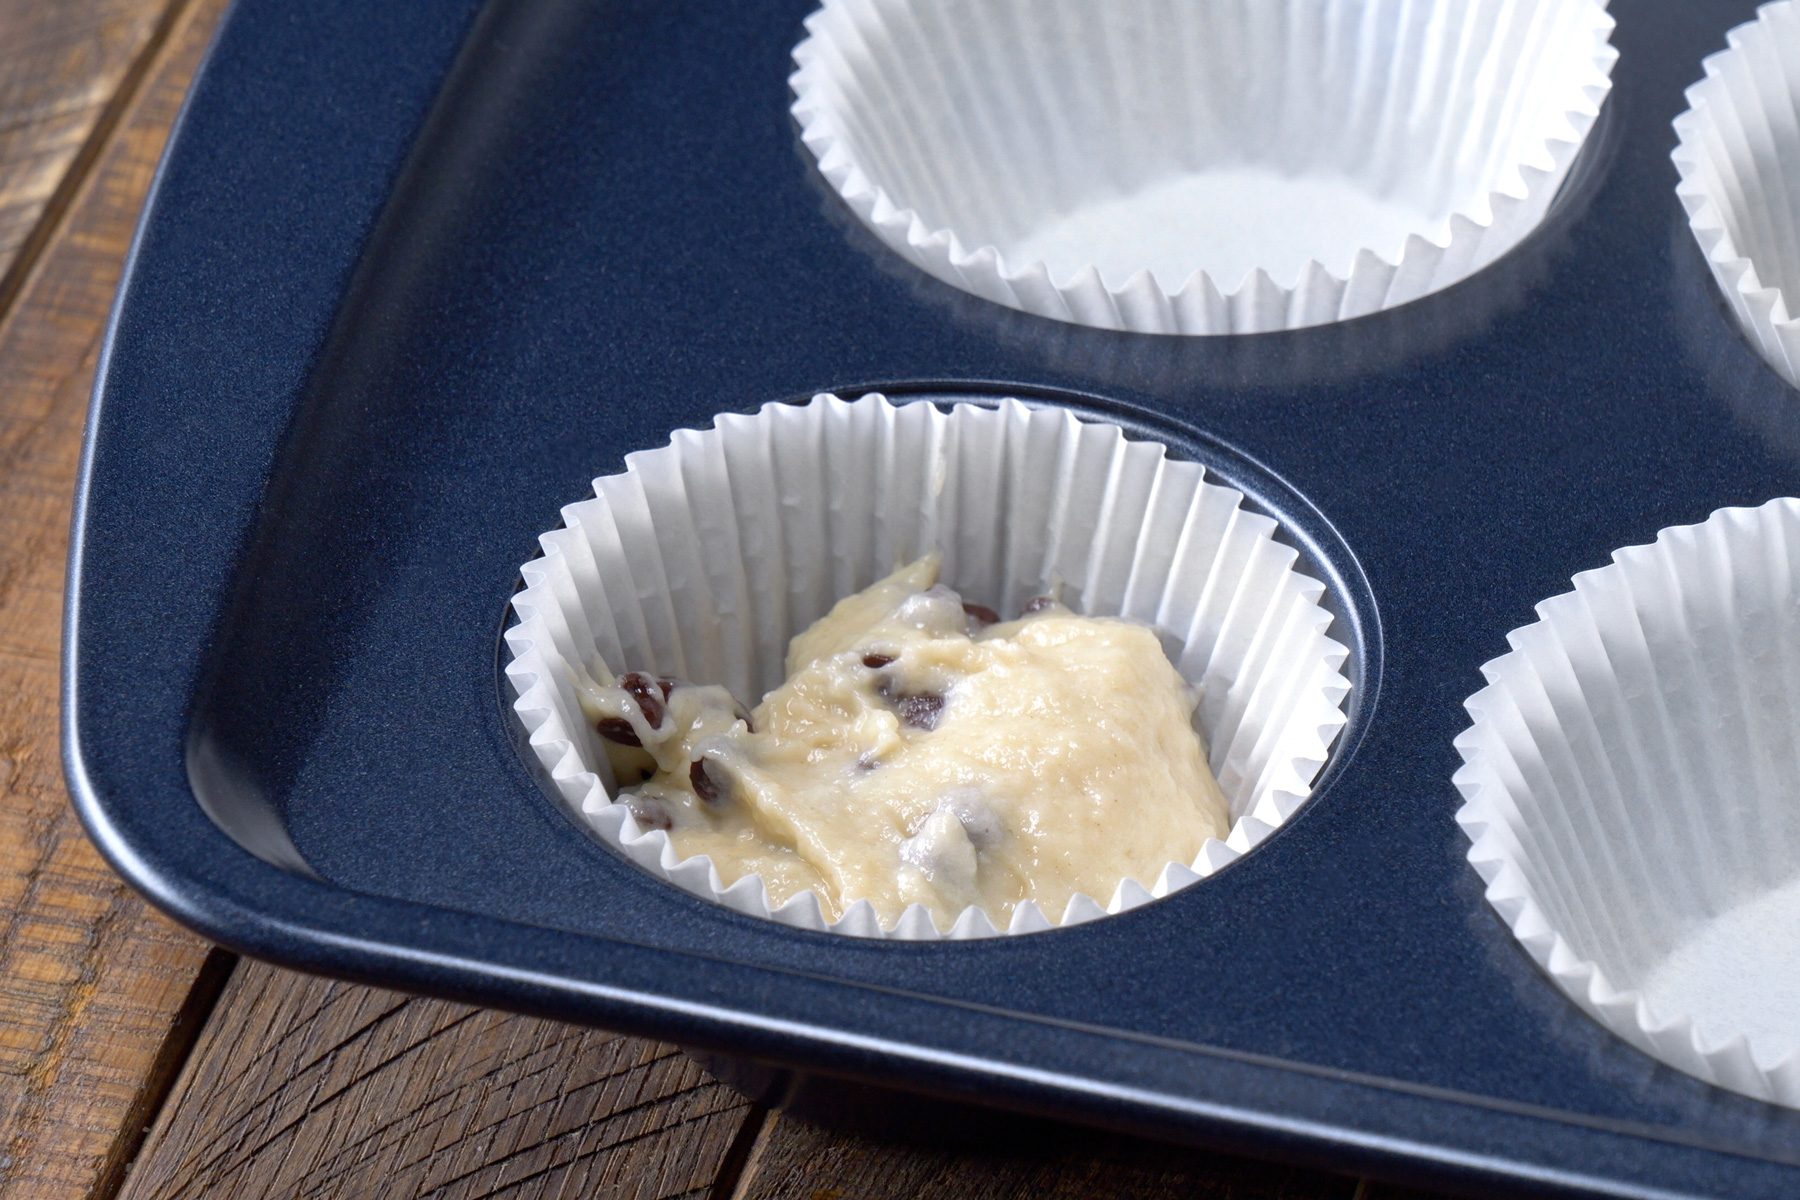 A tray filled with muffin cups containing Chocolate Chip Muffin batter.